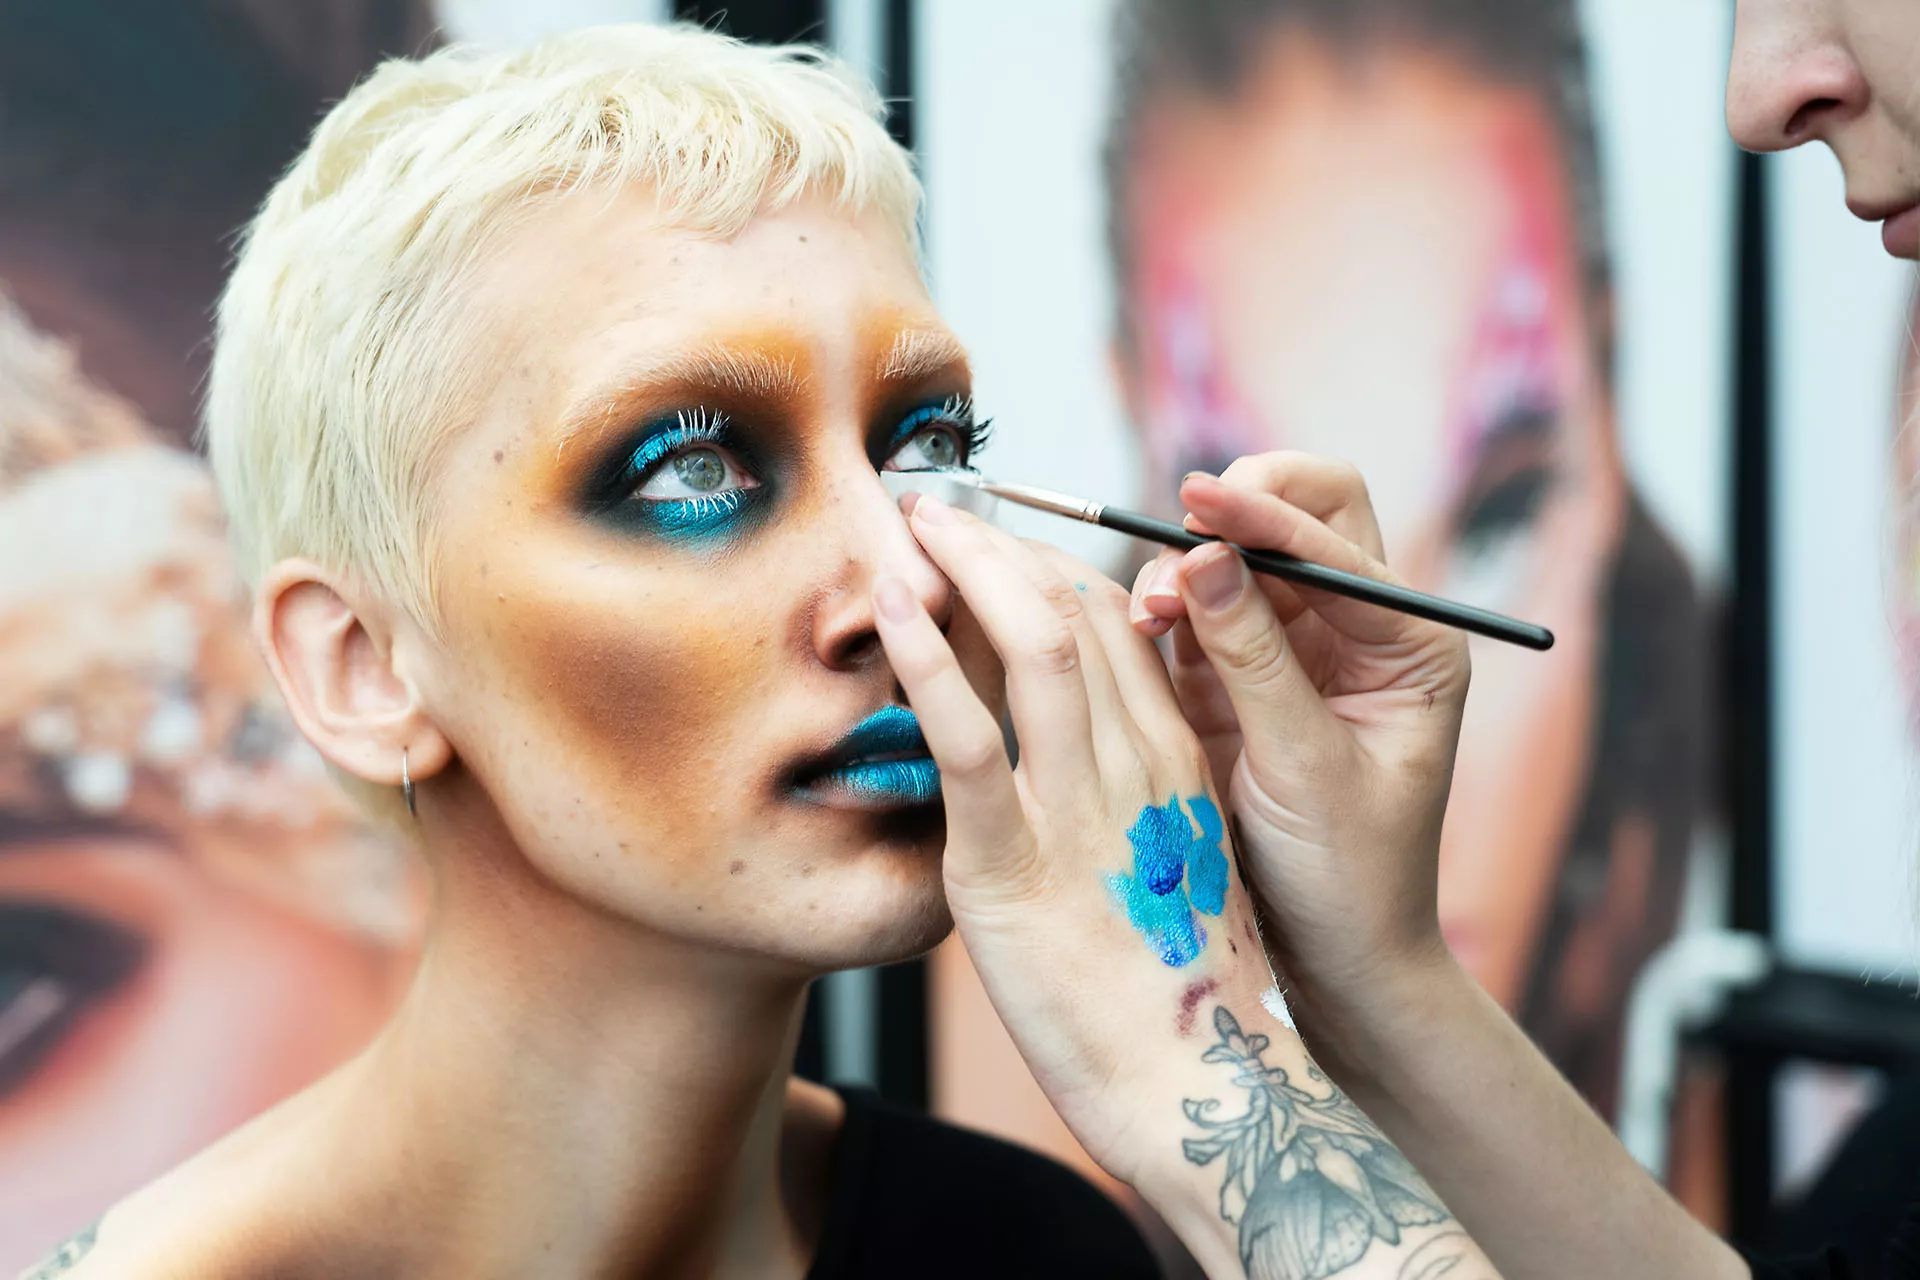 IMATS Vancouver 2018: a Celebration of Creativity, Artistry, and All Things Beauty